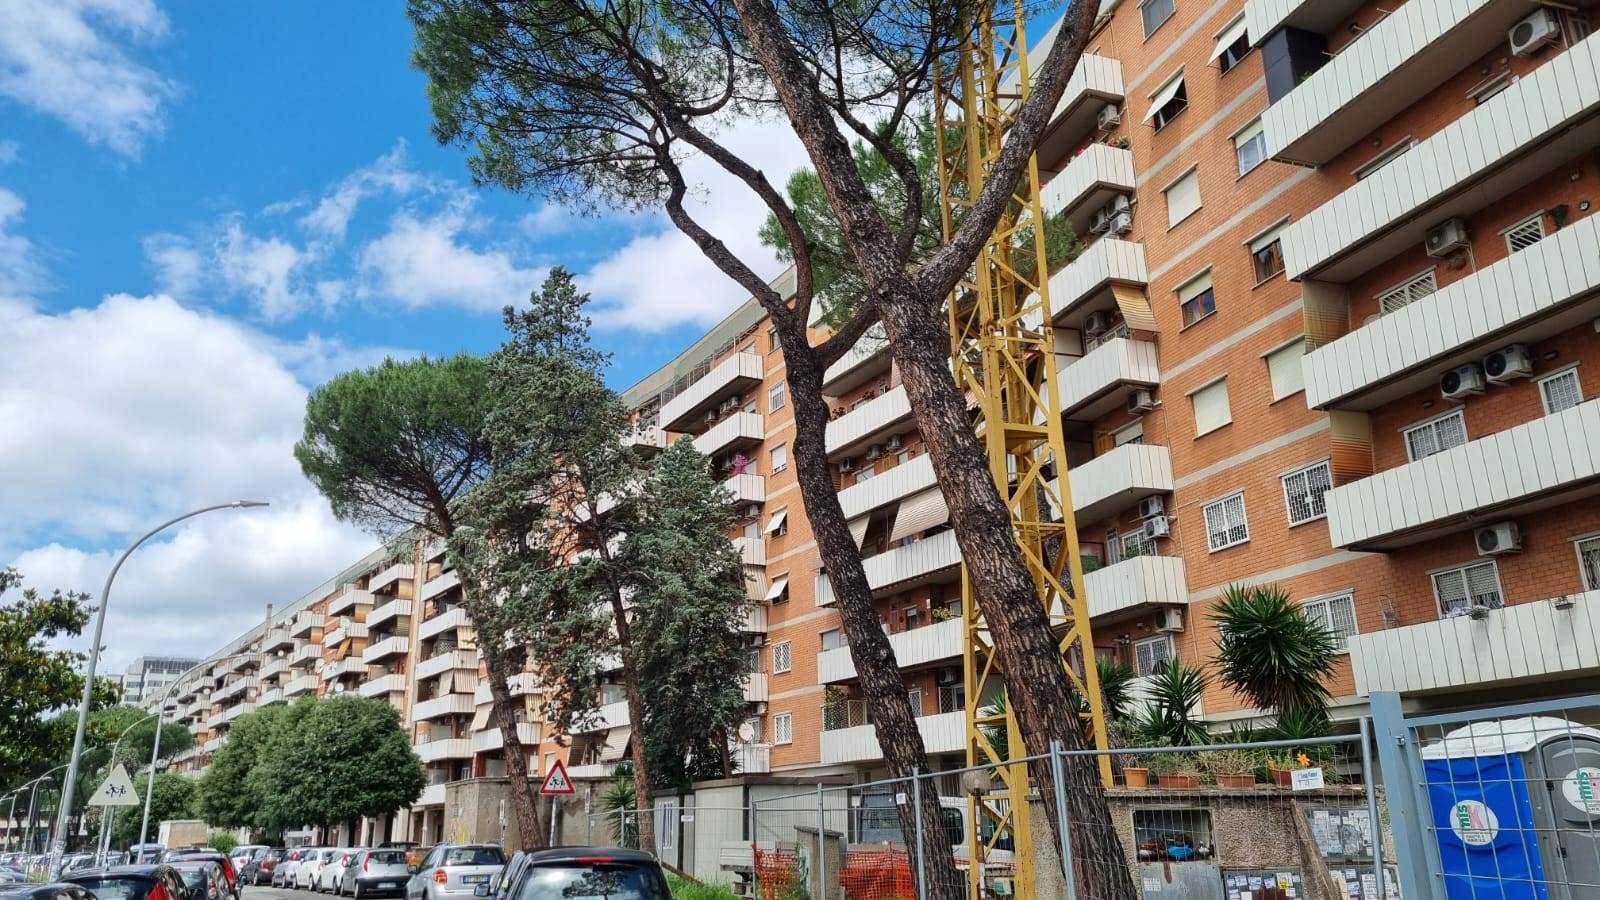 CINECITTÀ, ROMA, Apartment for sale of 100 Sq. mt., Good condition, Heating Individual heating system, Energetic class: G, Epi: 175 kwh/m2 year, placed at 4° on 7, composed by: 3.5 Rooms, Separate 